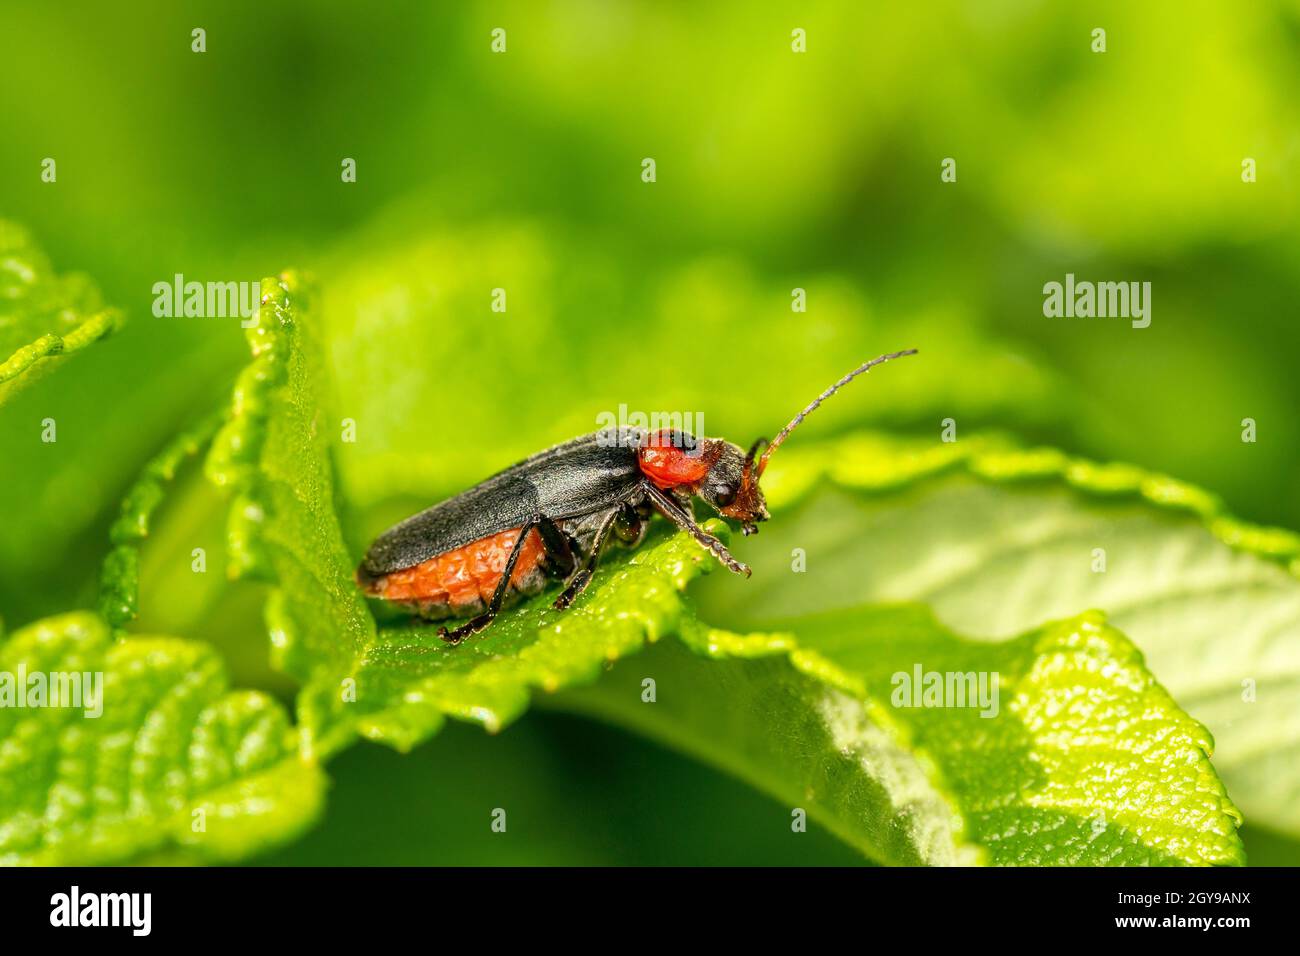 Cantharis livida is a species of soldier beetle sitting on a green leaf, close up view. Natural background. Stock Photo